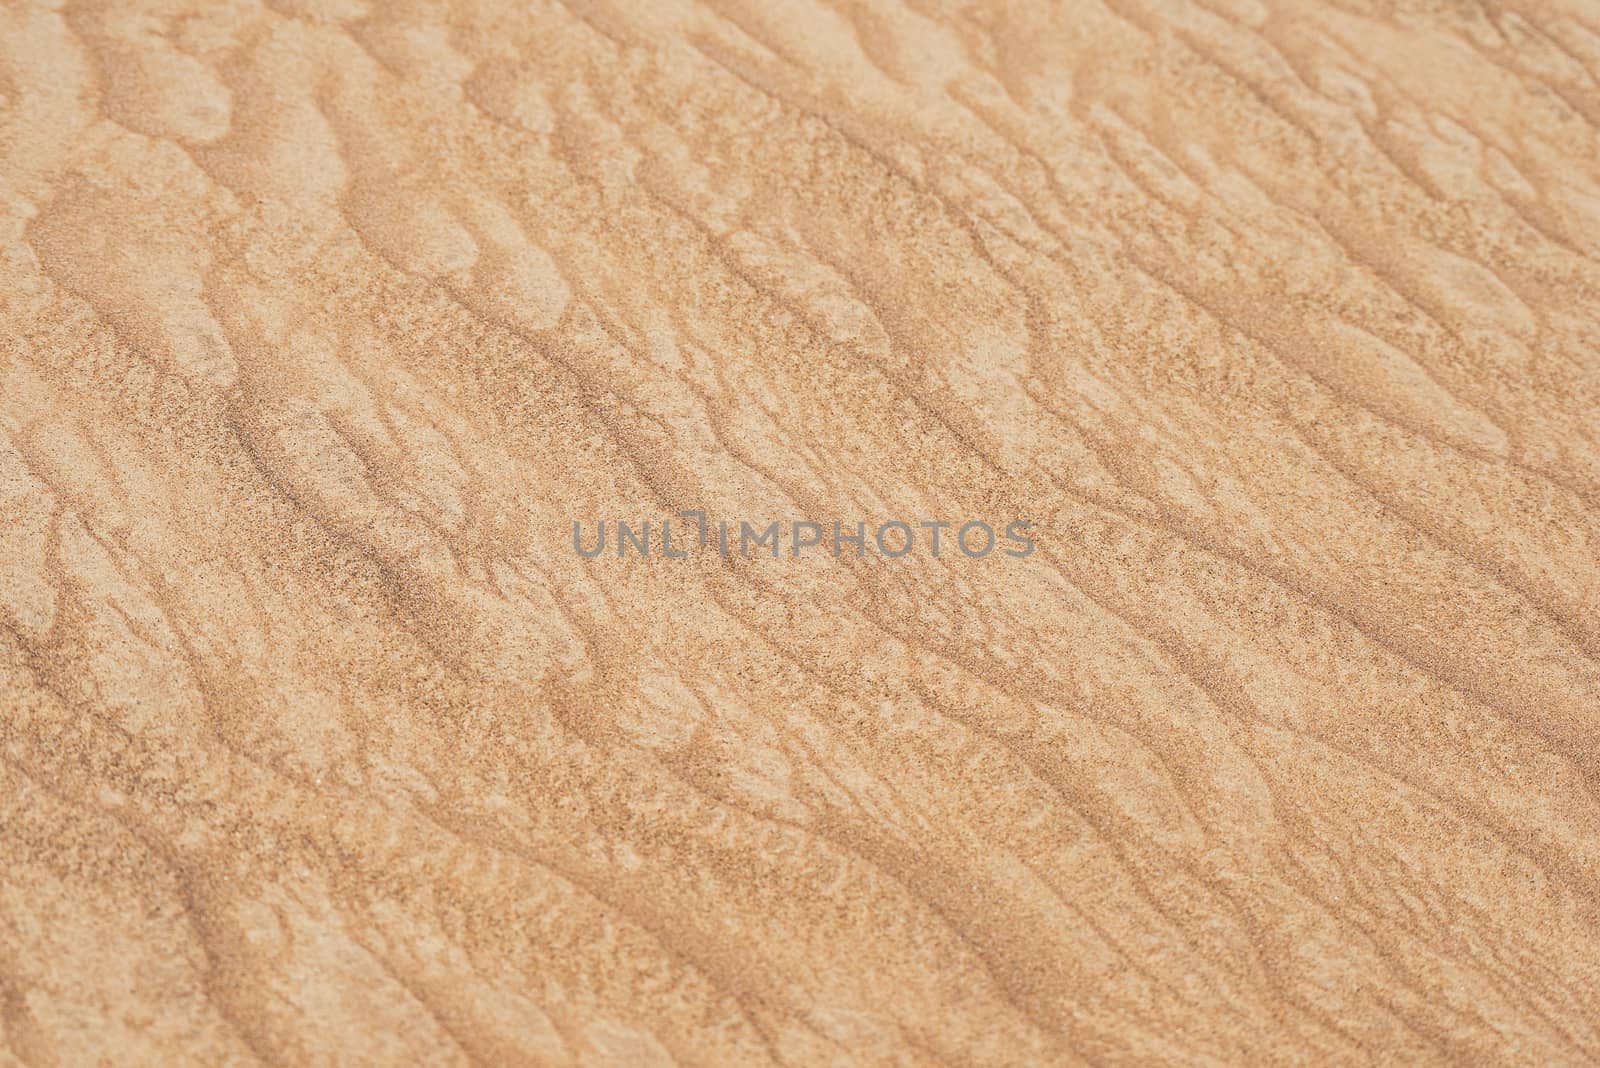 Real Desert sand texture and pattern for background or presentation